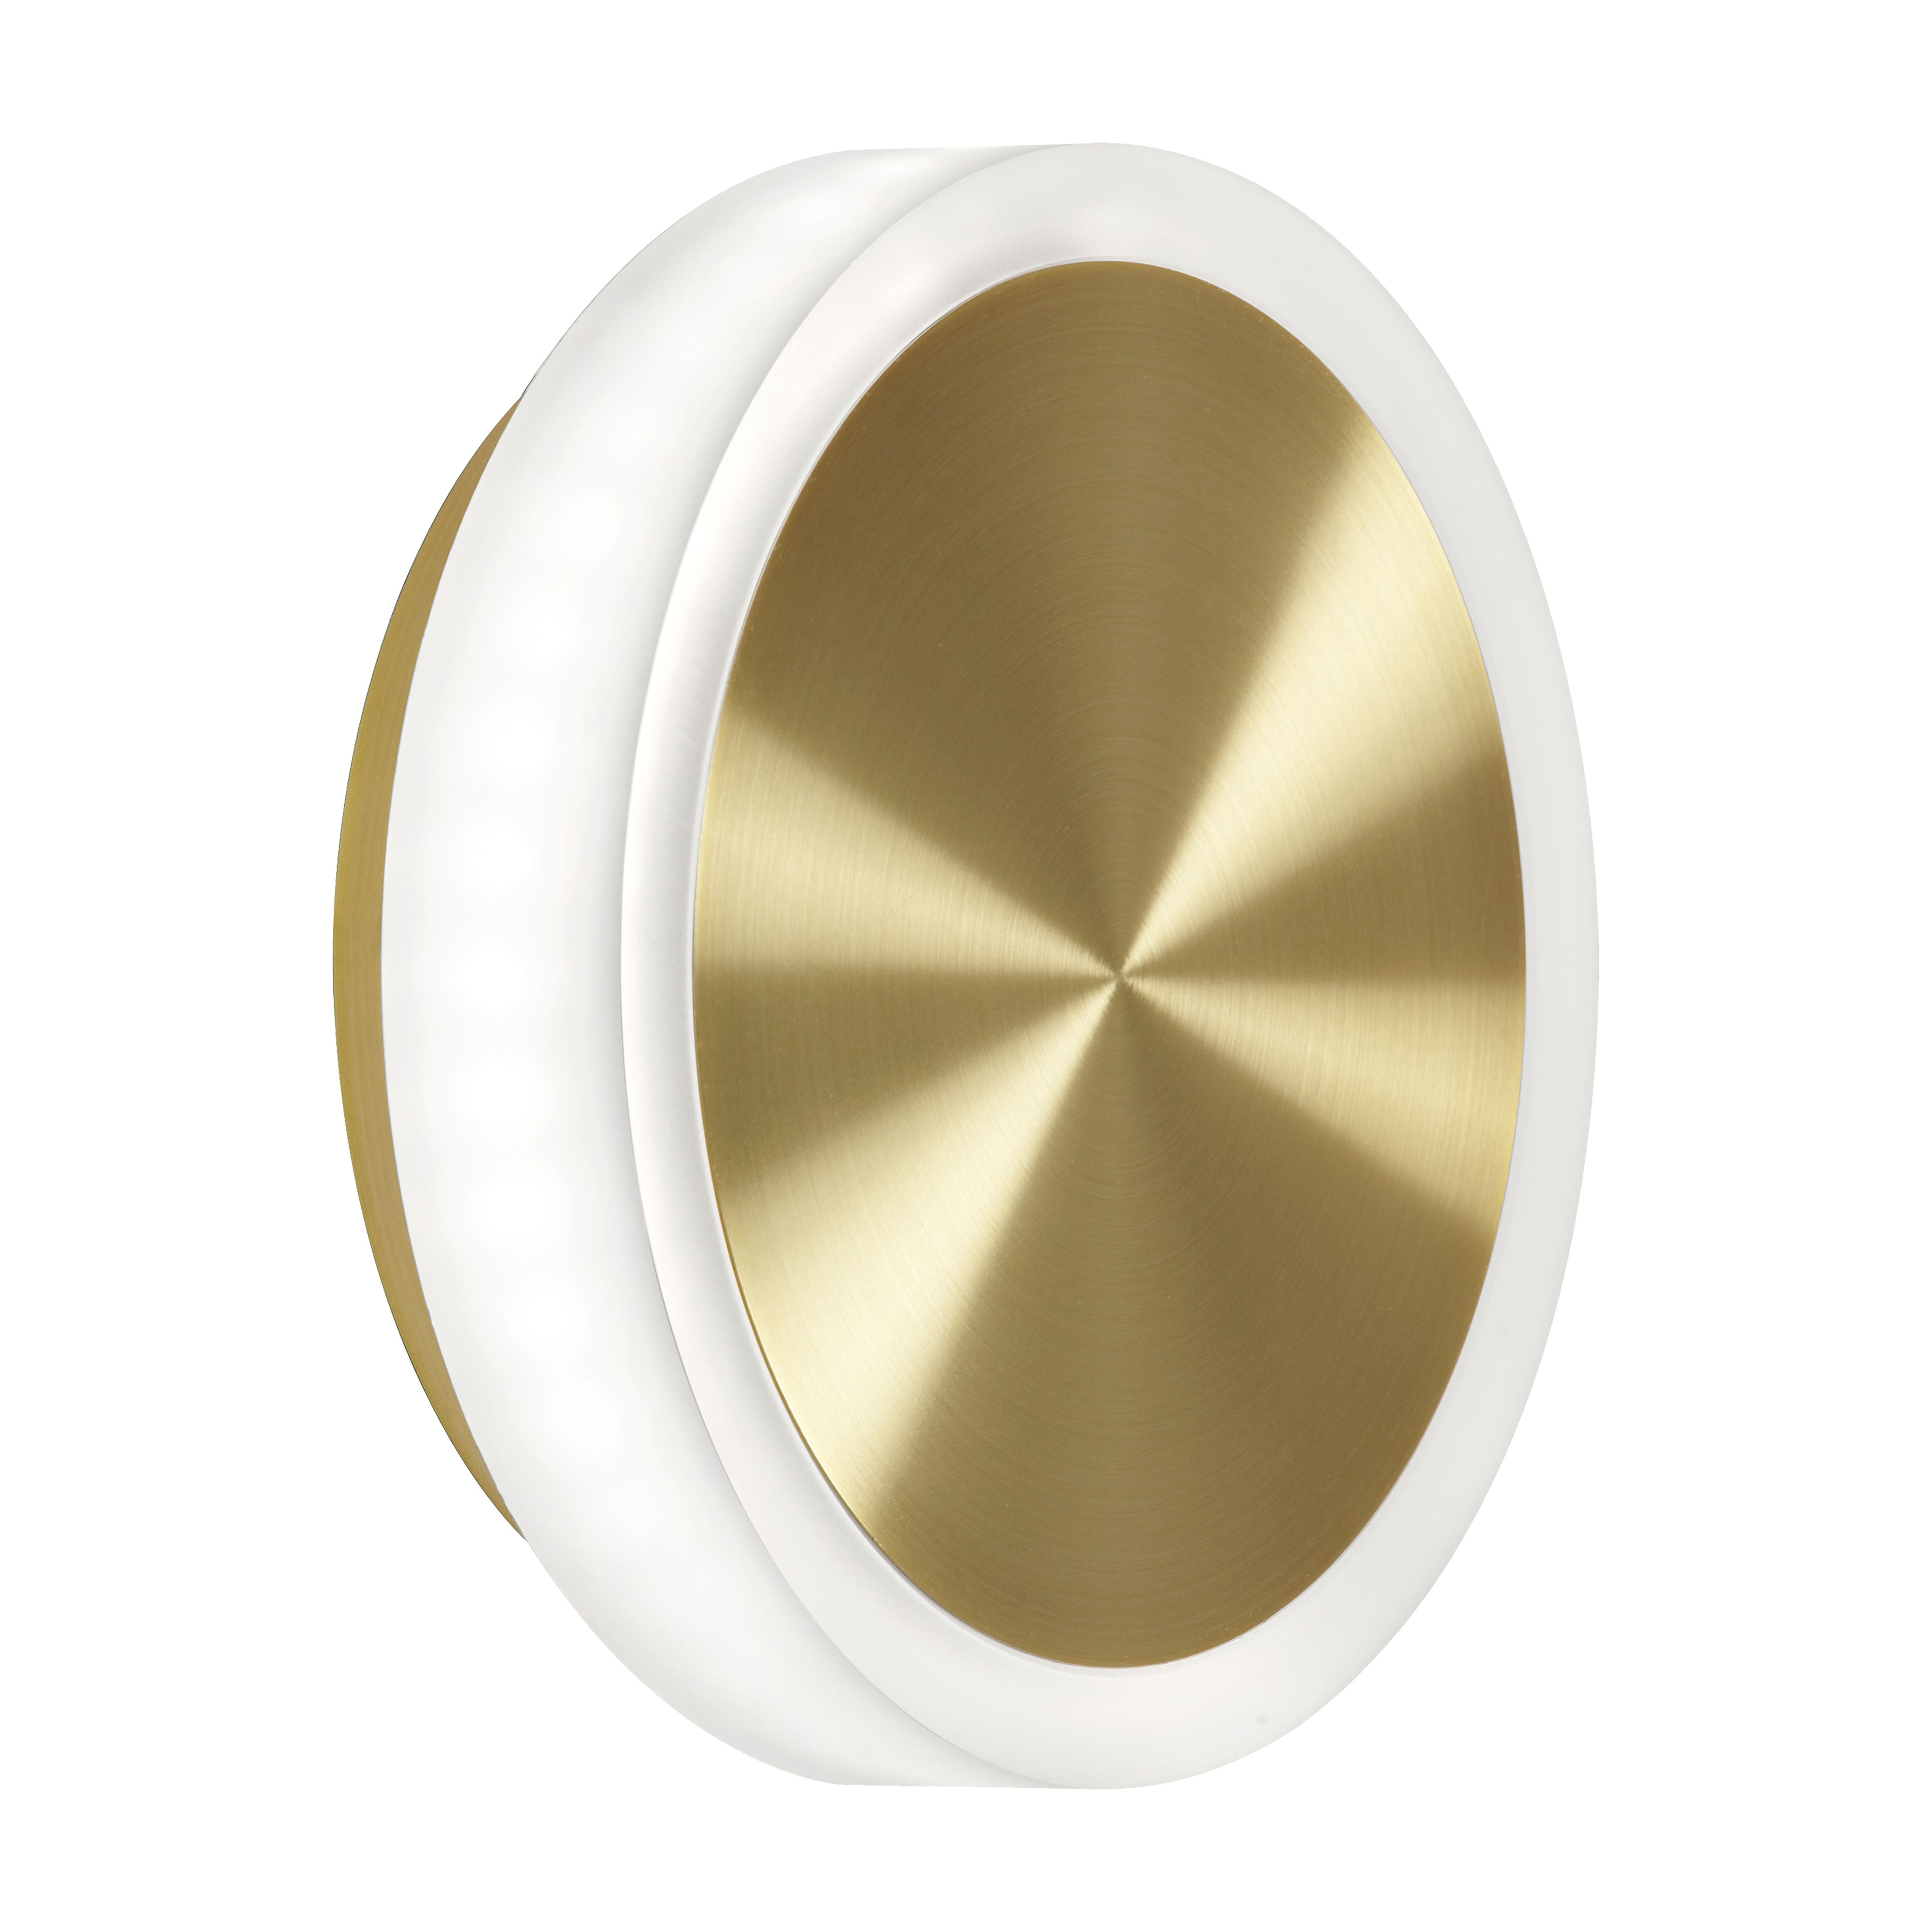 TOPAZ Wall sconce Gold INTEGRATED LED - TOP-612LEDW-AGB | DAINOLITE